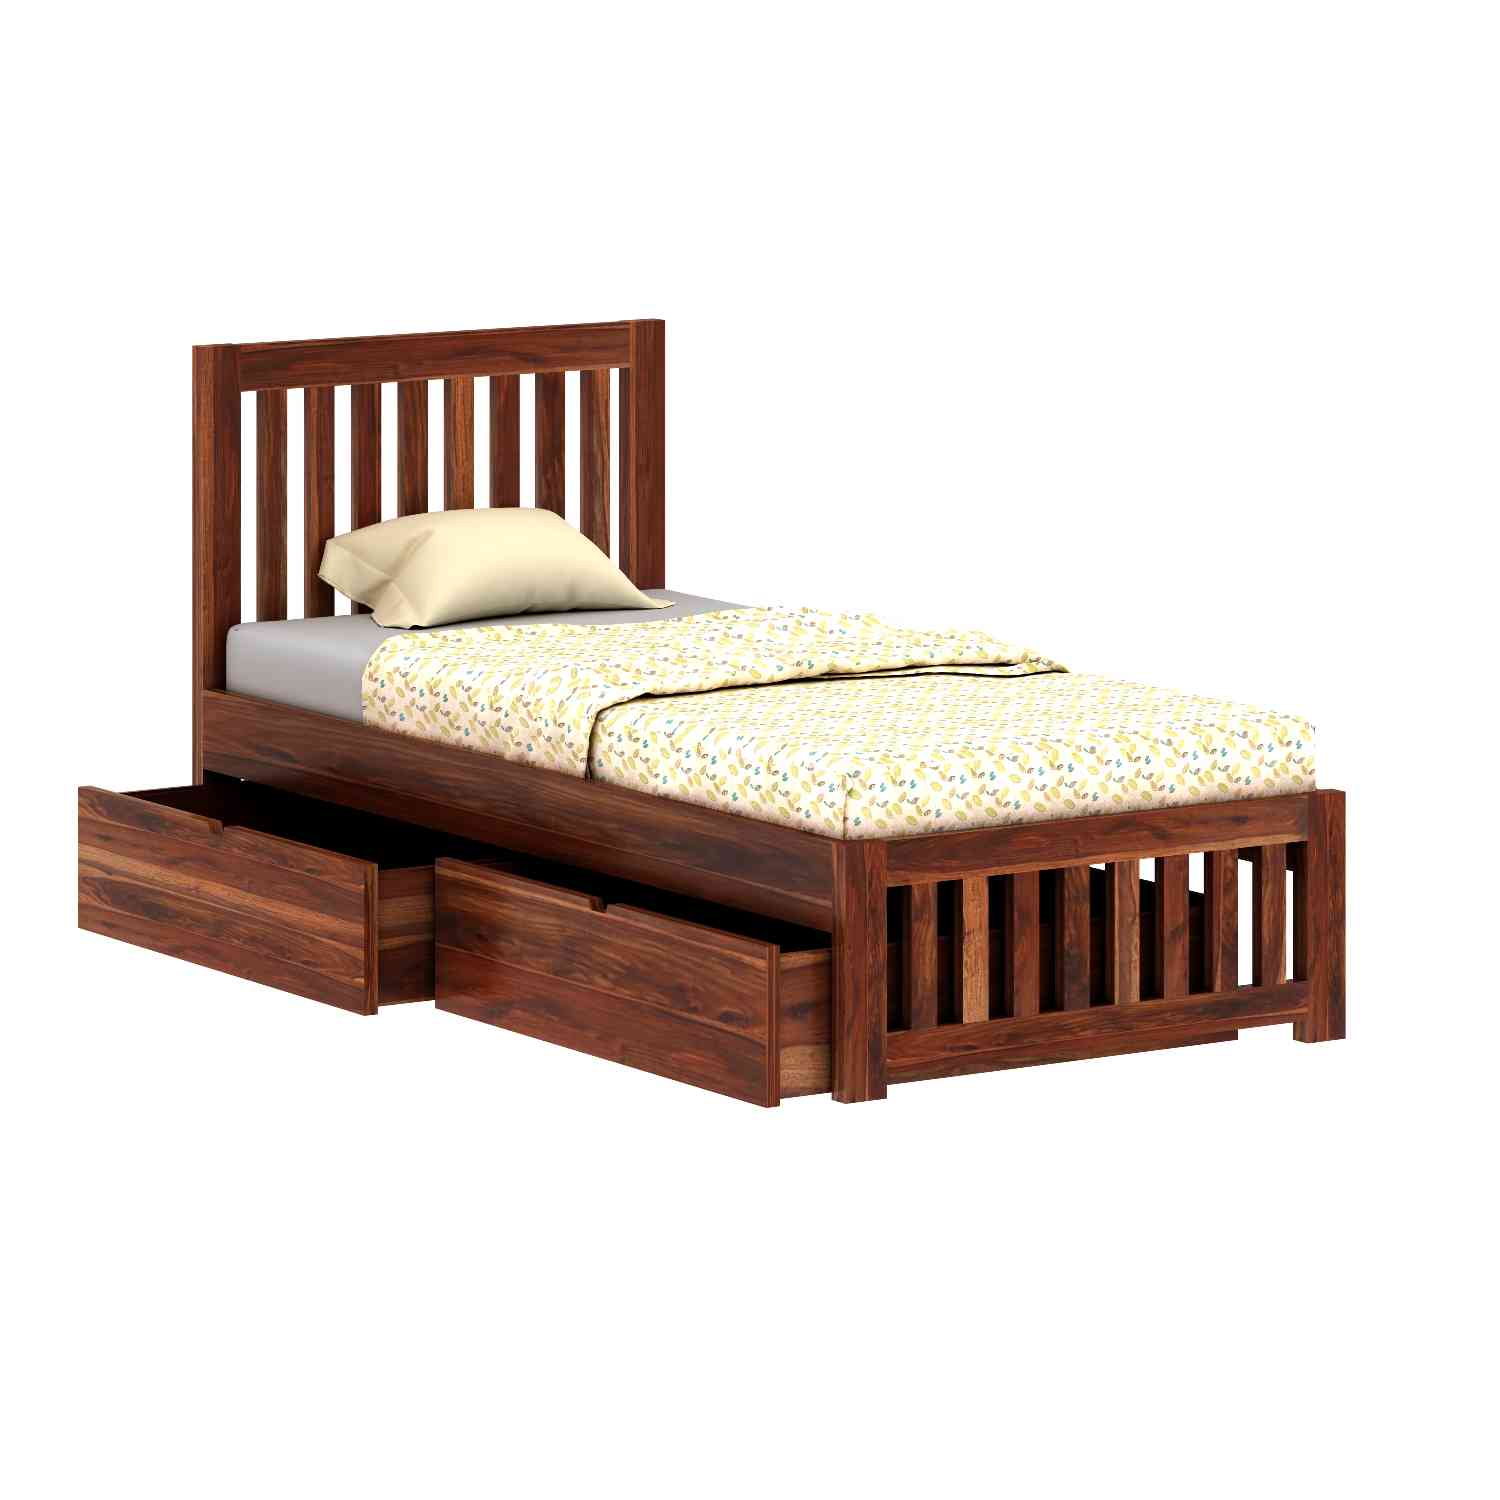 Fusta Solid Sheesham Wood Single Bed With Two Drawers (Natural Finish)